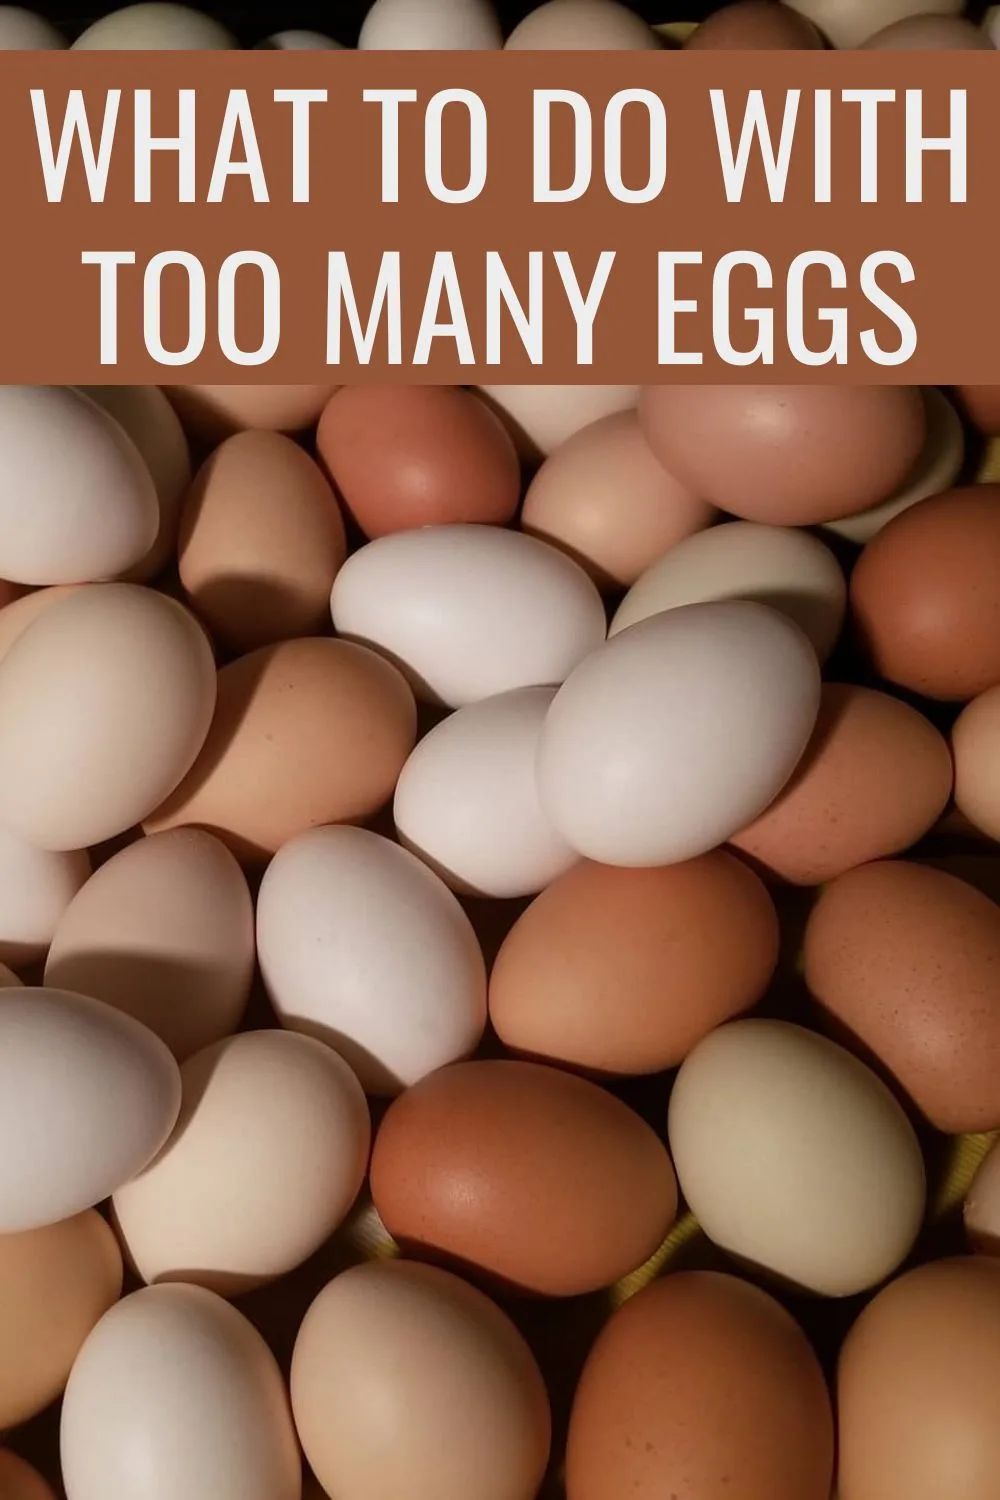 What to do with too many eggs